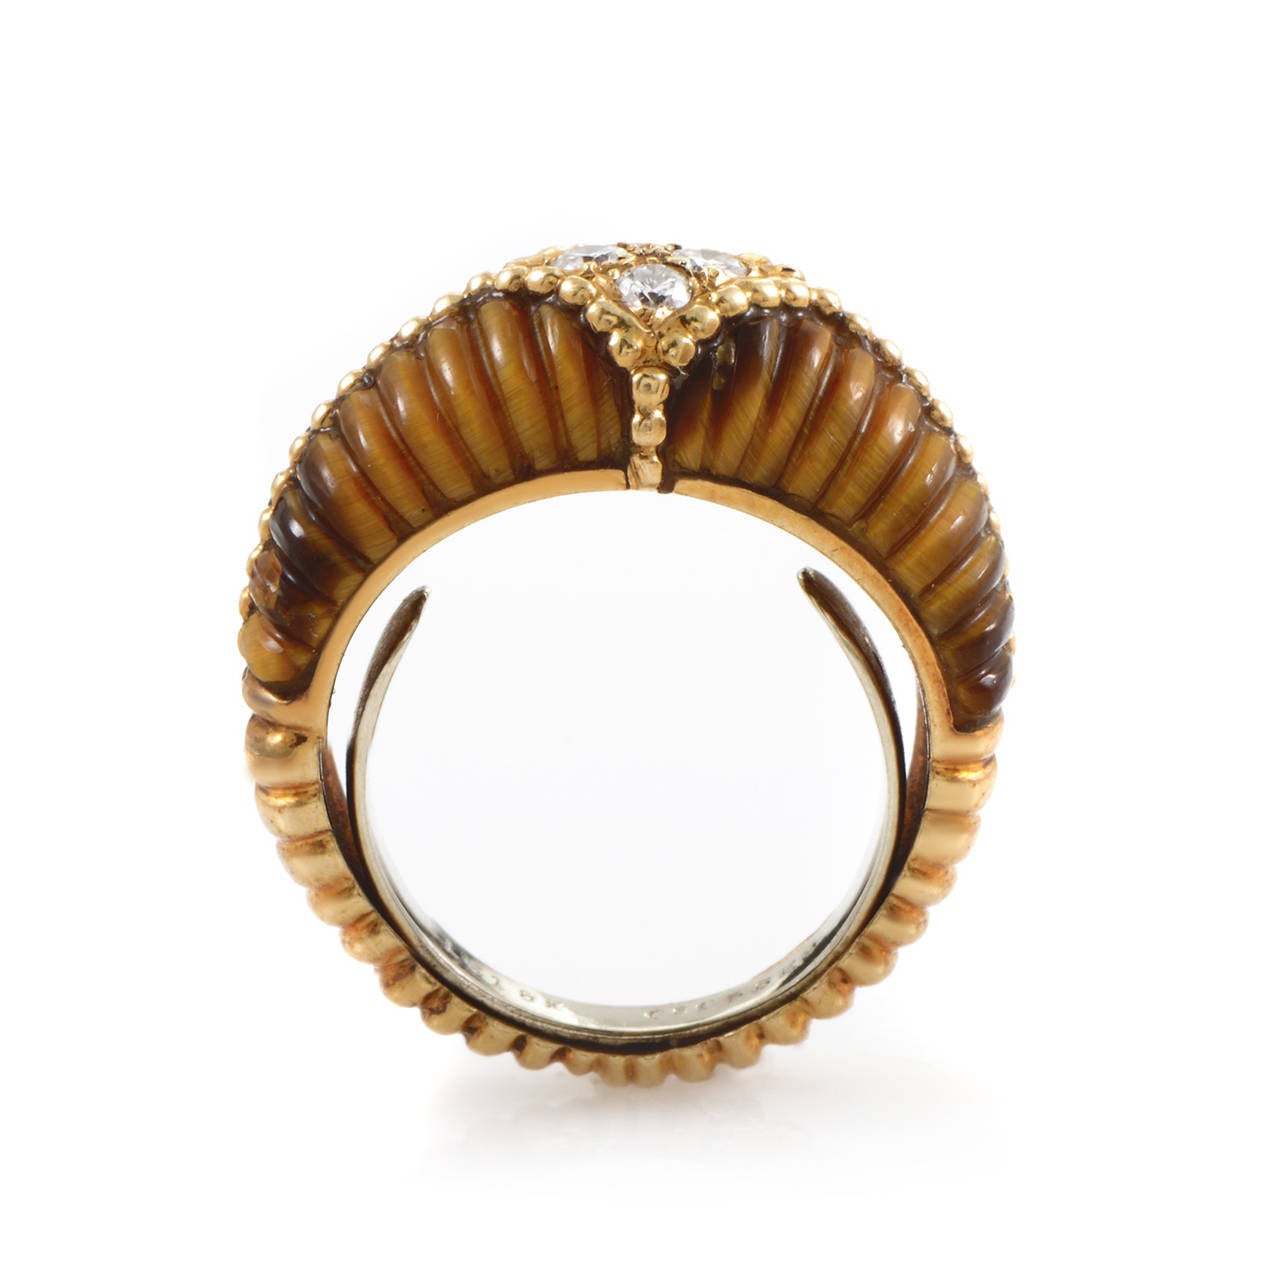 With its wonderful change in nuance and a compelling overall tone, the tiger eye stone is fitted perfectly into this harmonious ring from Van Cleef & Arpels embellished with 0.17ct of diamonds, its fluted design matching that of the 18K yellow gold